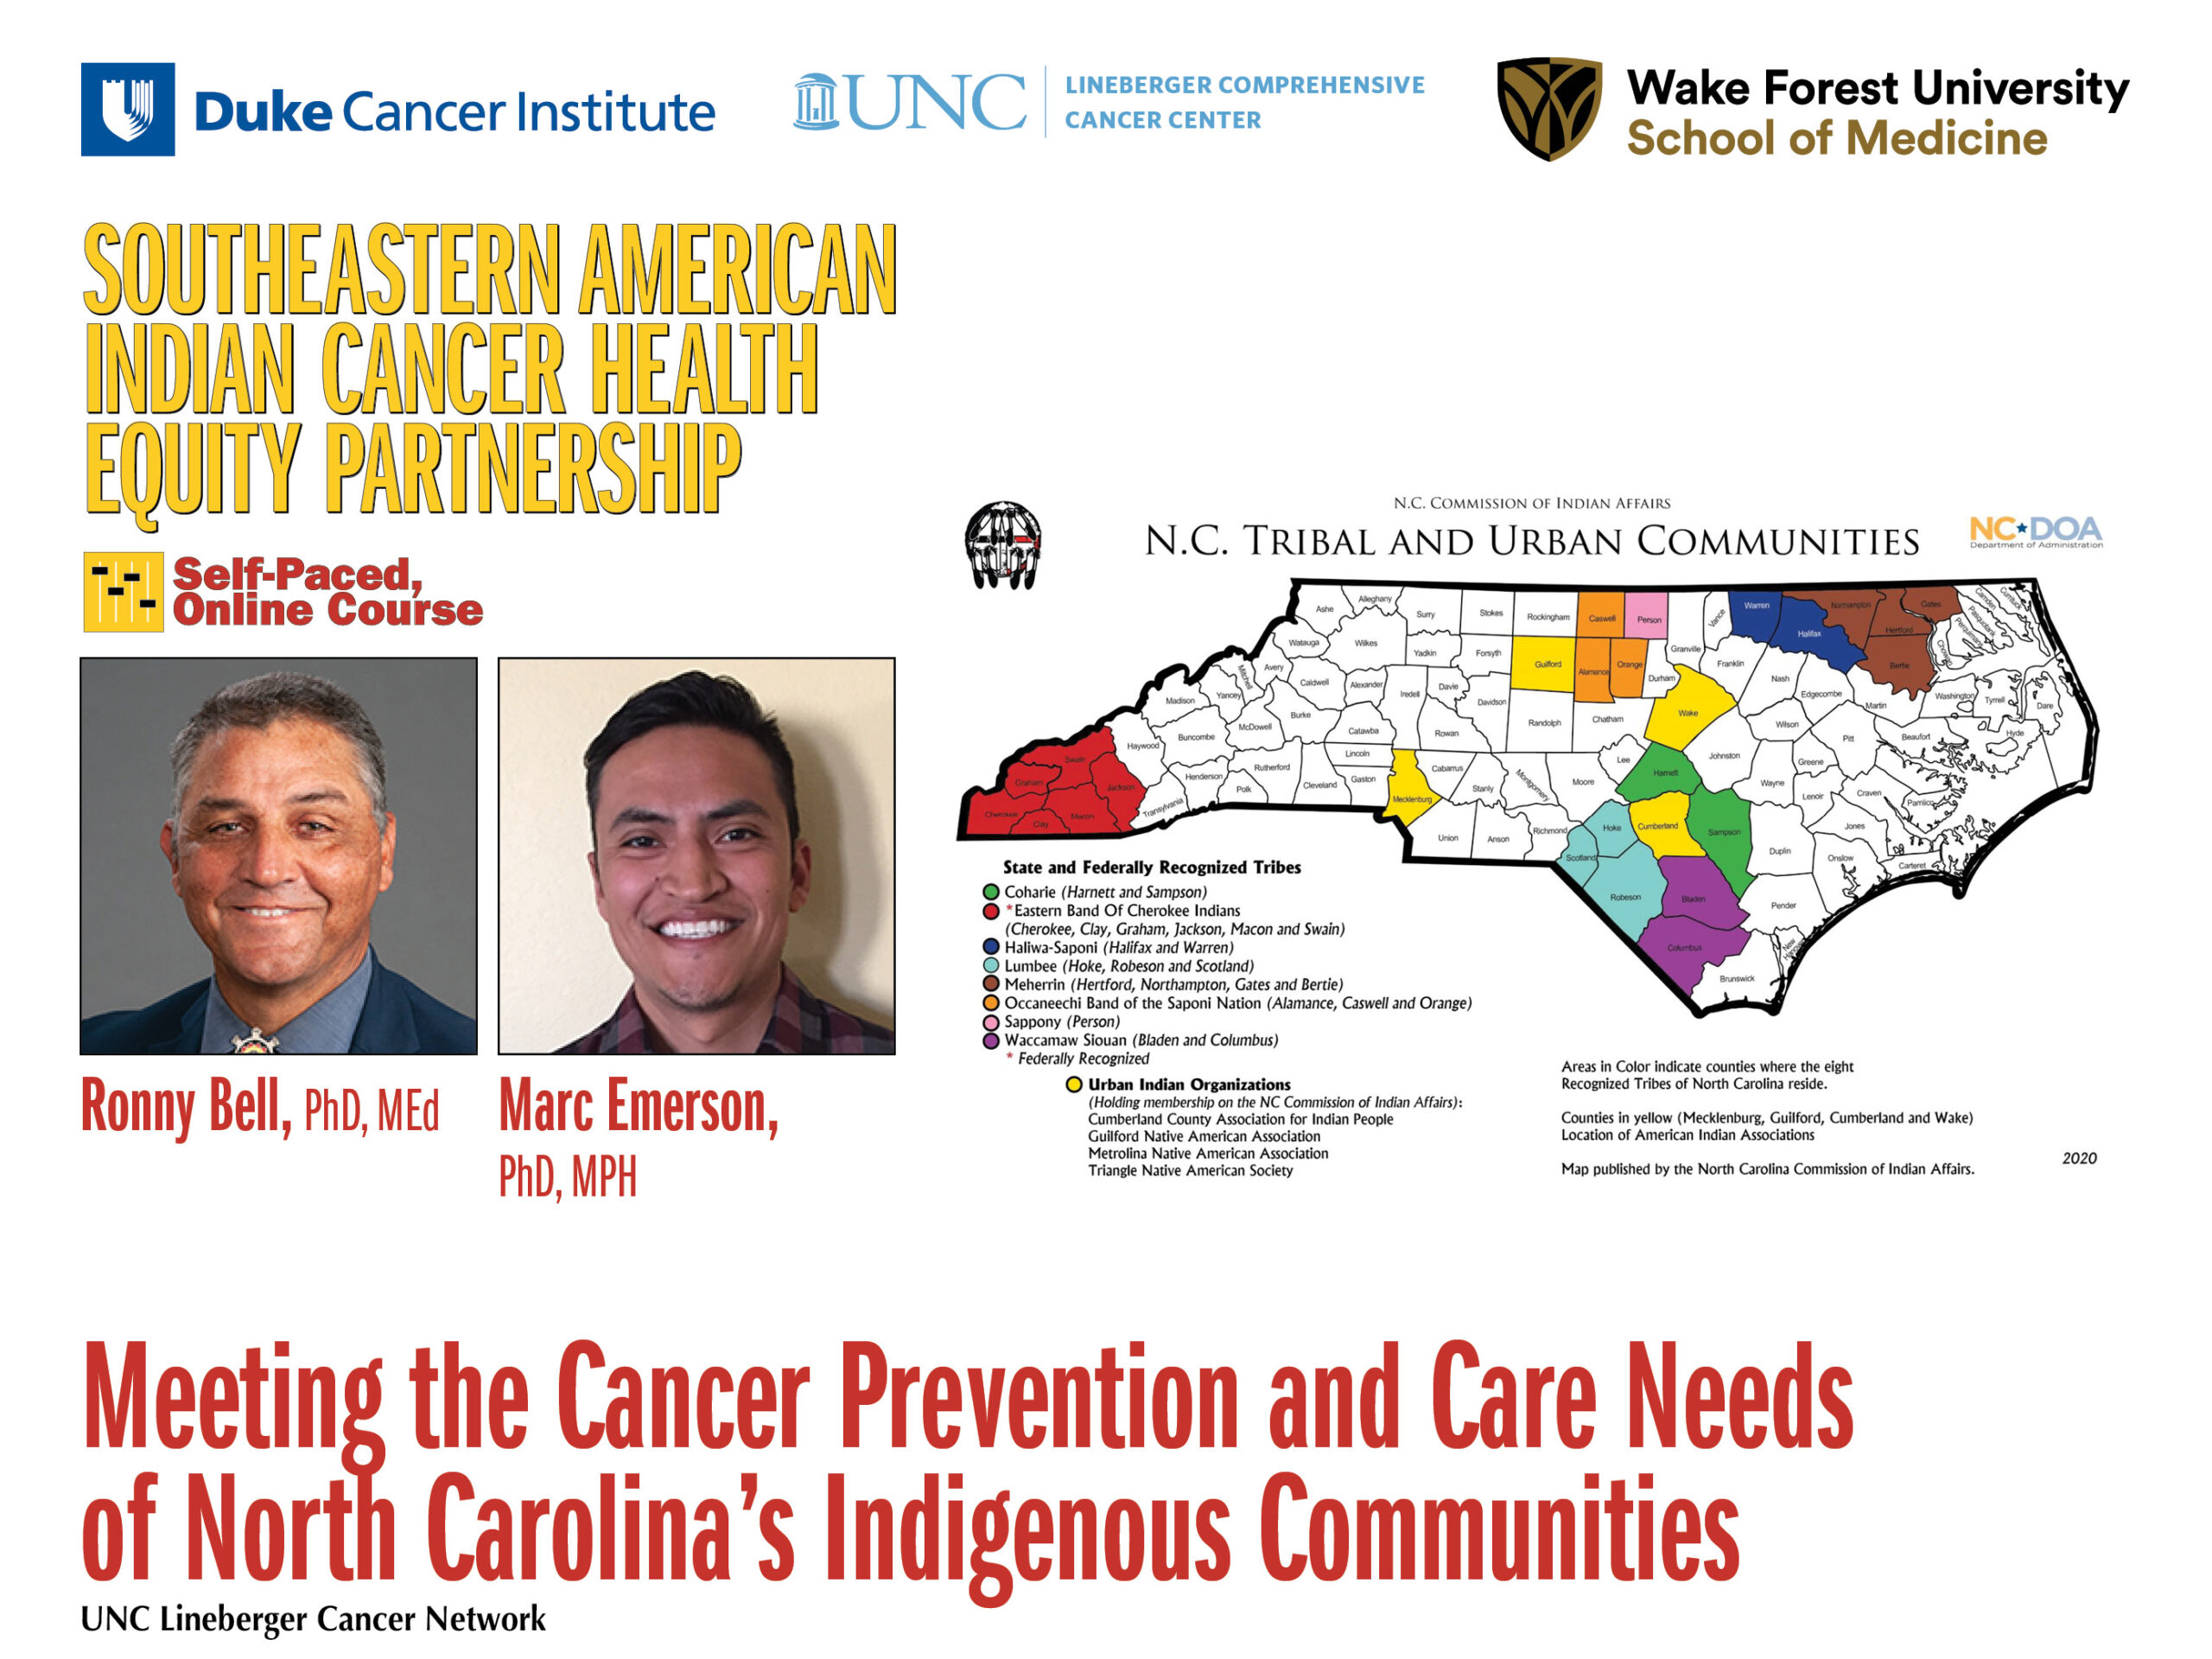 Meeting the Cancer Prevention and Care Needs of North Carolina’s Indigenous Communities